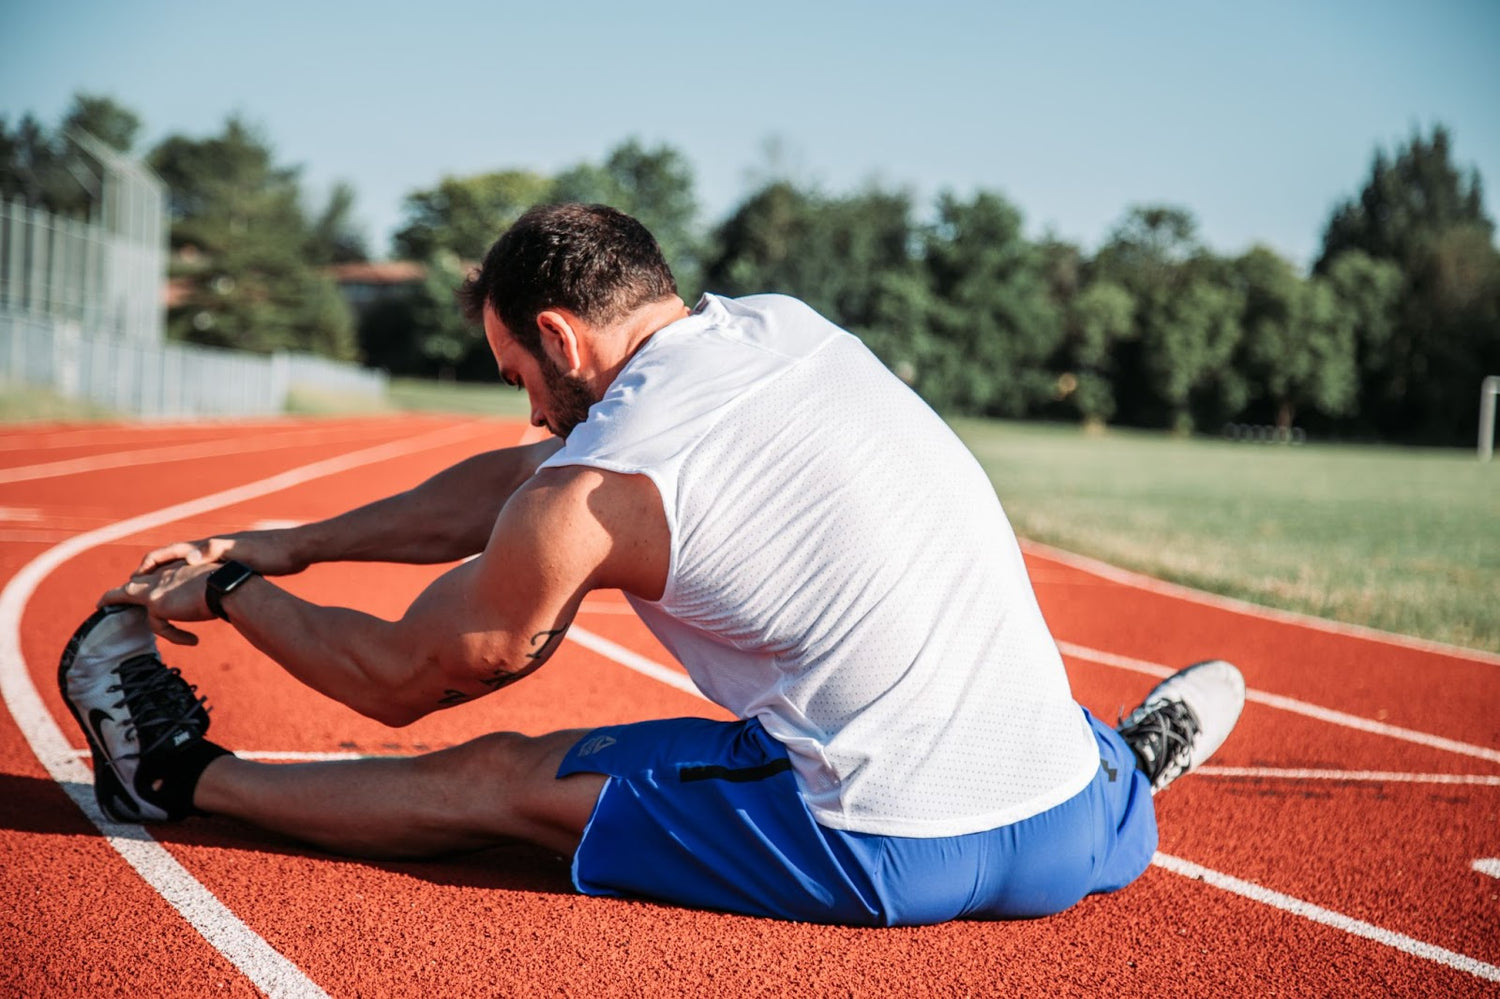 Ballistic Stretching: What Is It and Is It Safe?